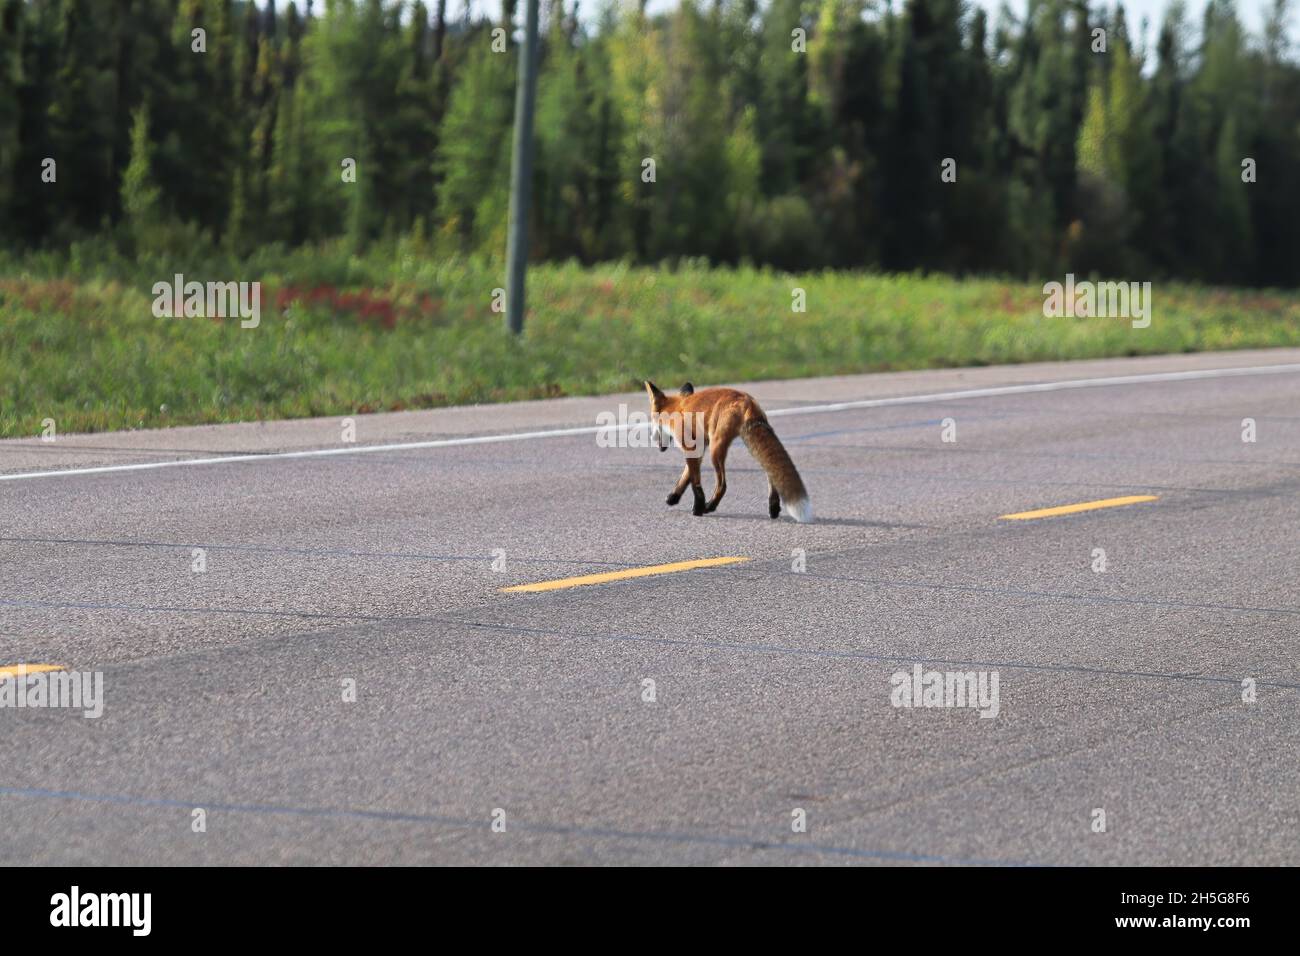 A fox crossing the highway in a forest area Stock Photo